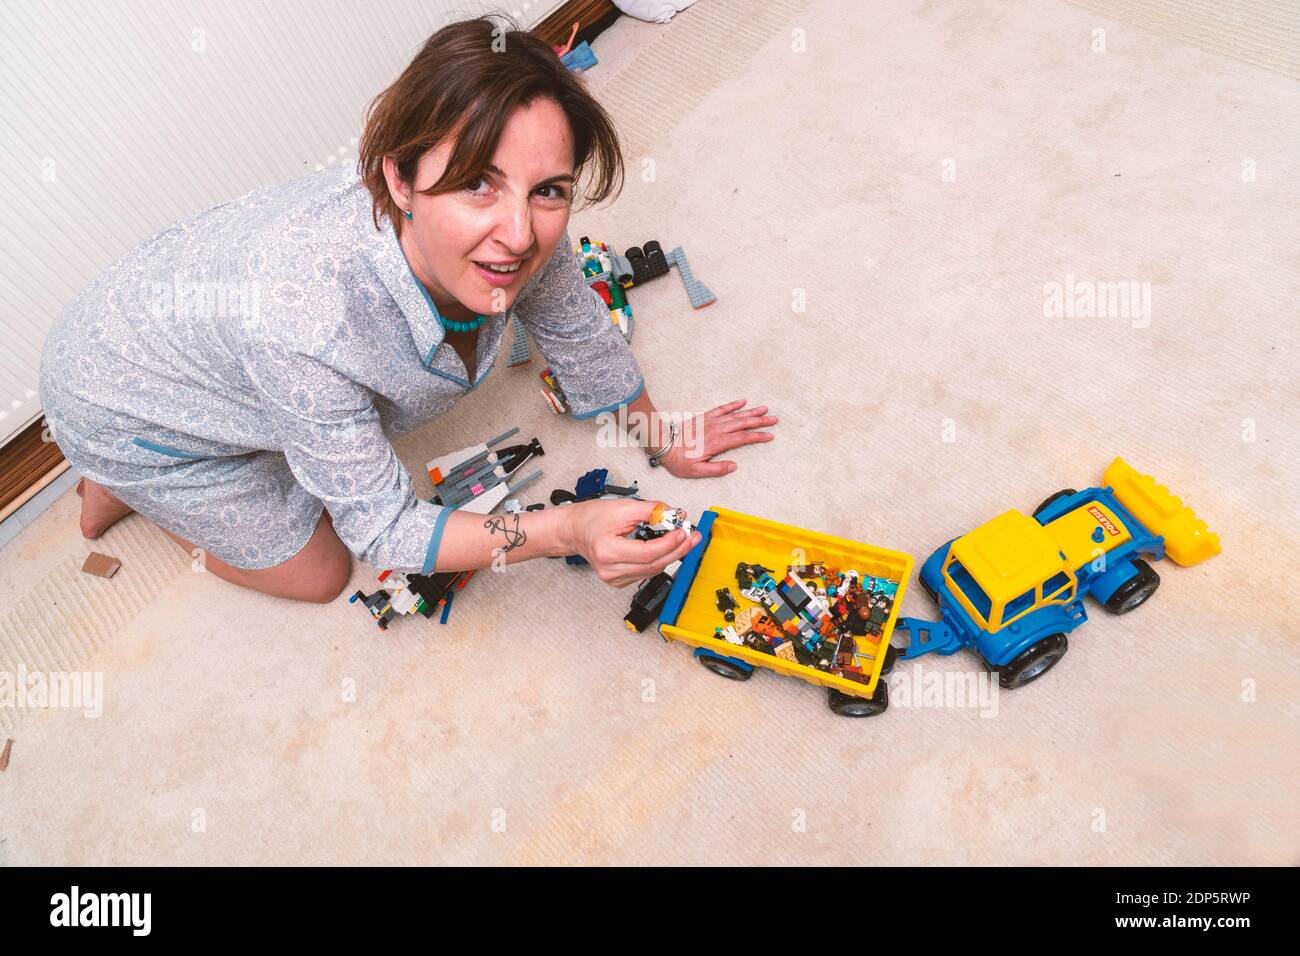 Exhausted and elegant dressed business woman is sitting on the floor and cleaning the toys of her kids. She looks unhappy and frustrated Stock Photo